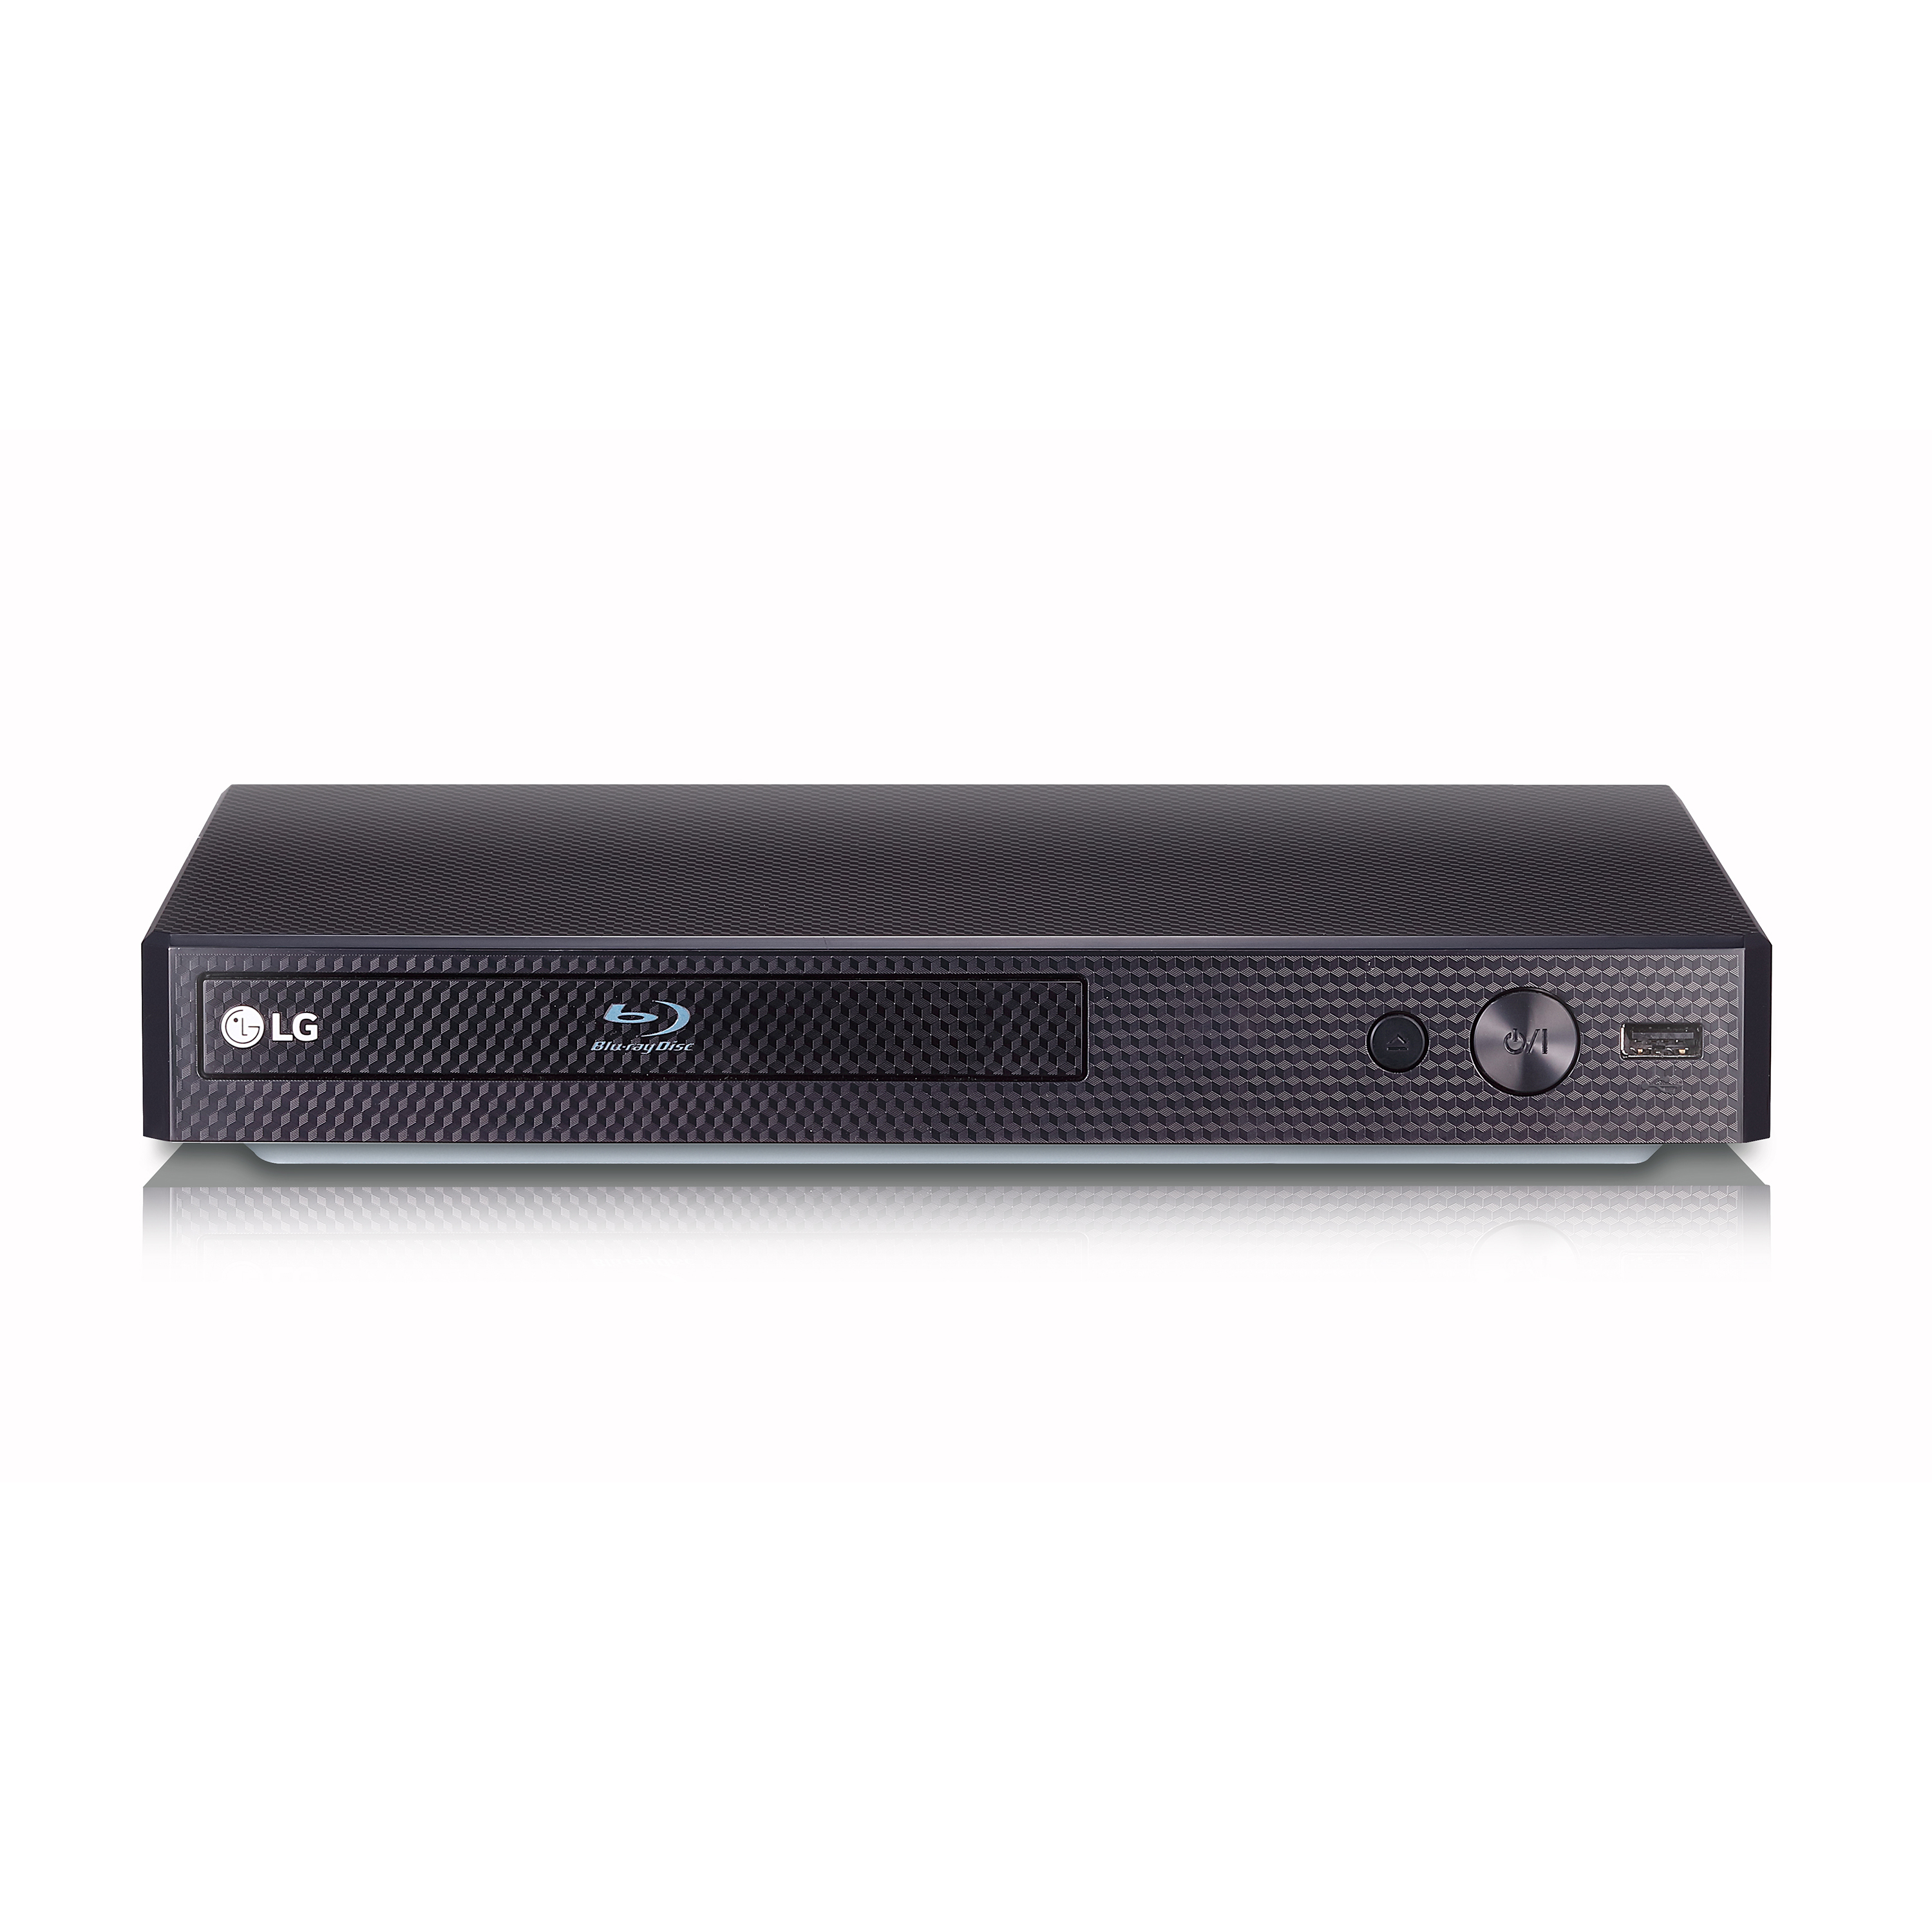 $15 LG Blu-ray Player with Streaming Services - BPM25 $15 at Walmart - YMMV